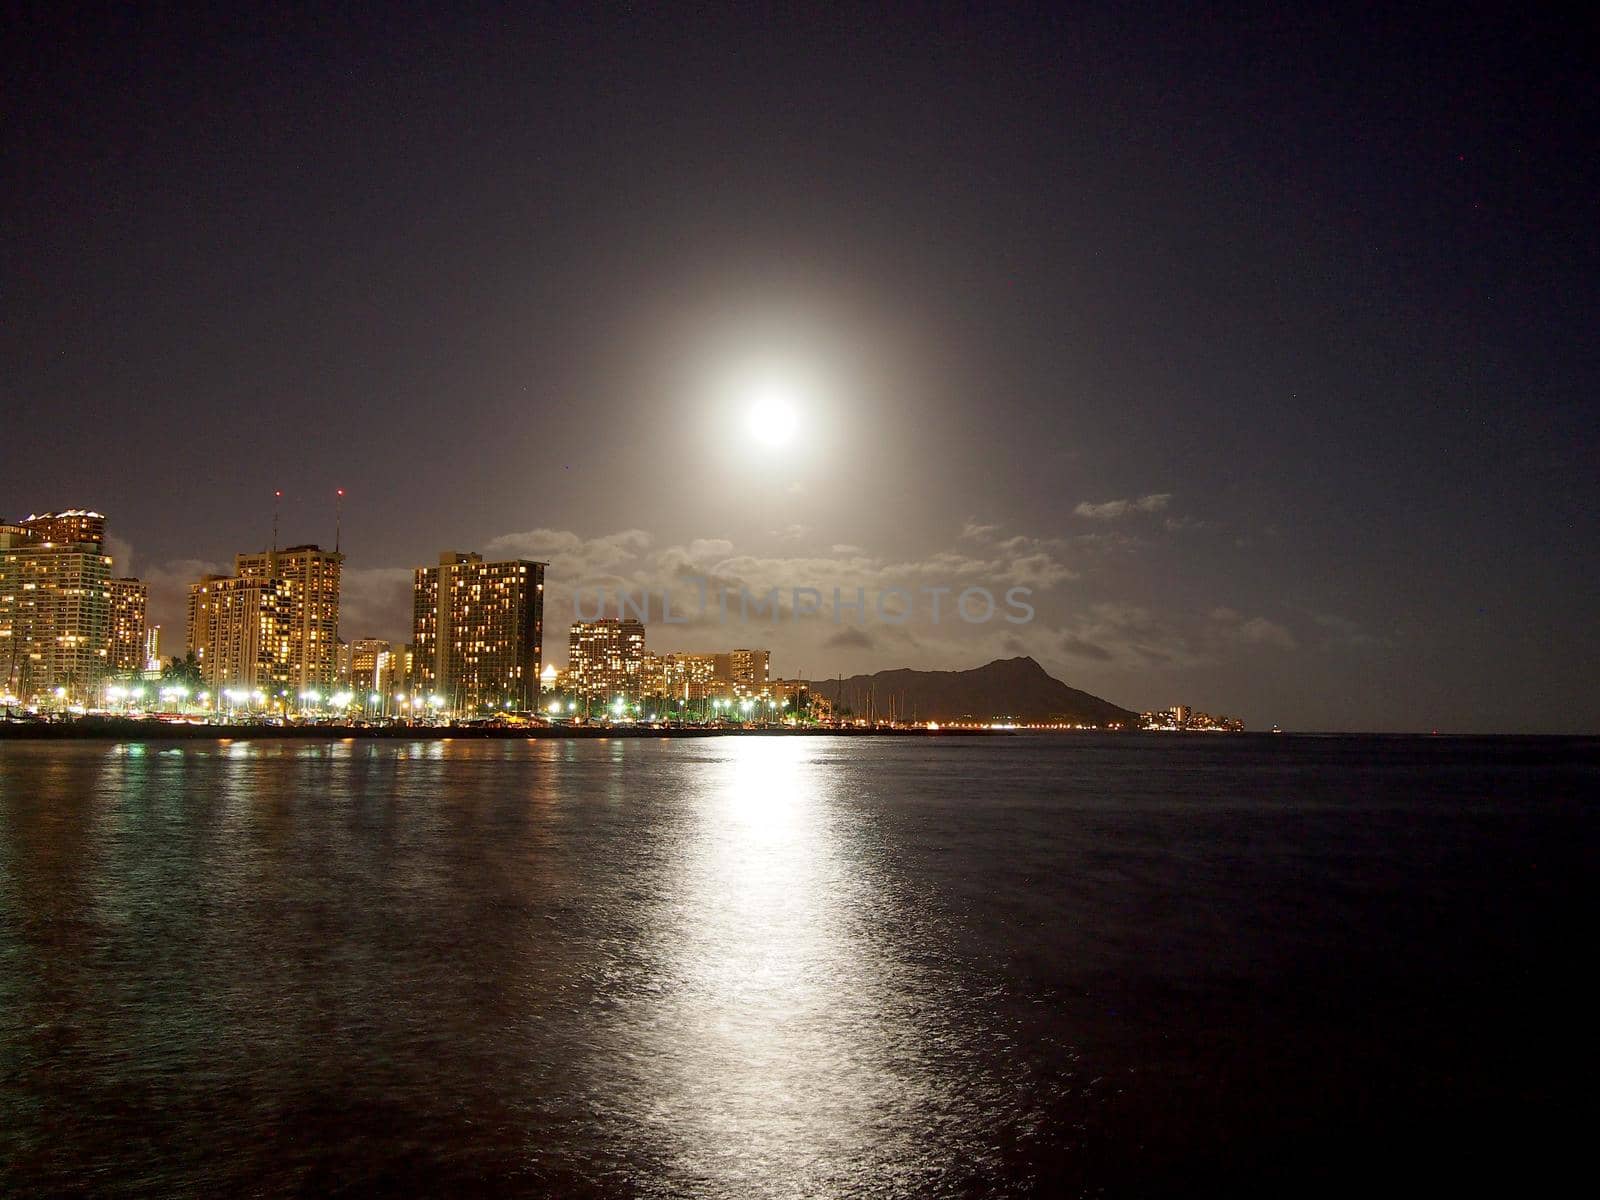 Full Large Moon hangs over Diamond Head Crater, Waikiki hotels, and Marina while reflecting on the water at Night on Oahu, Hawaii.